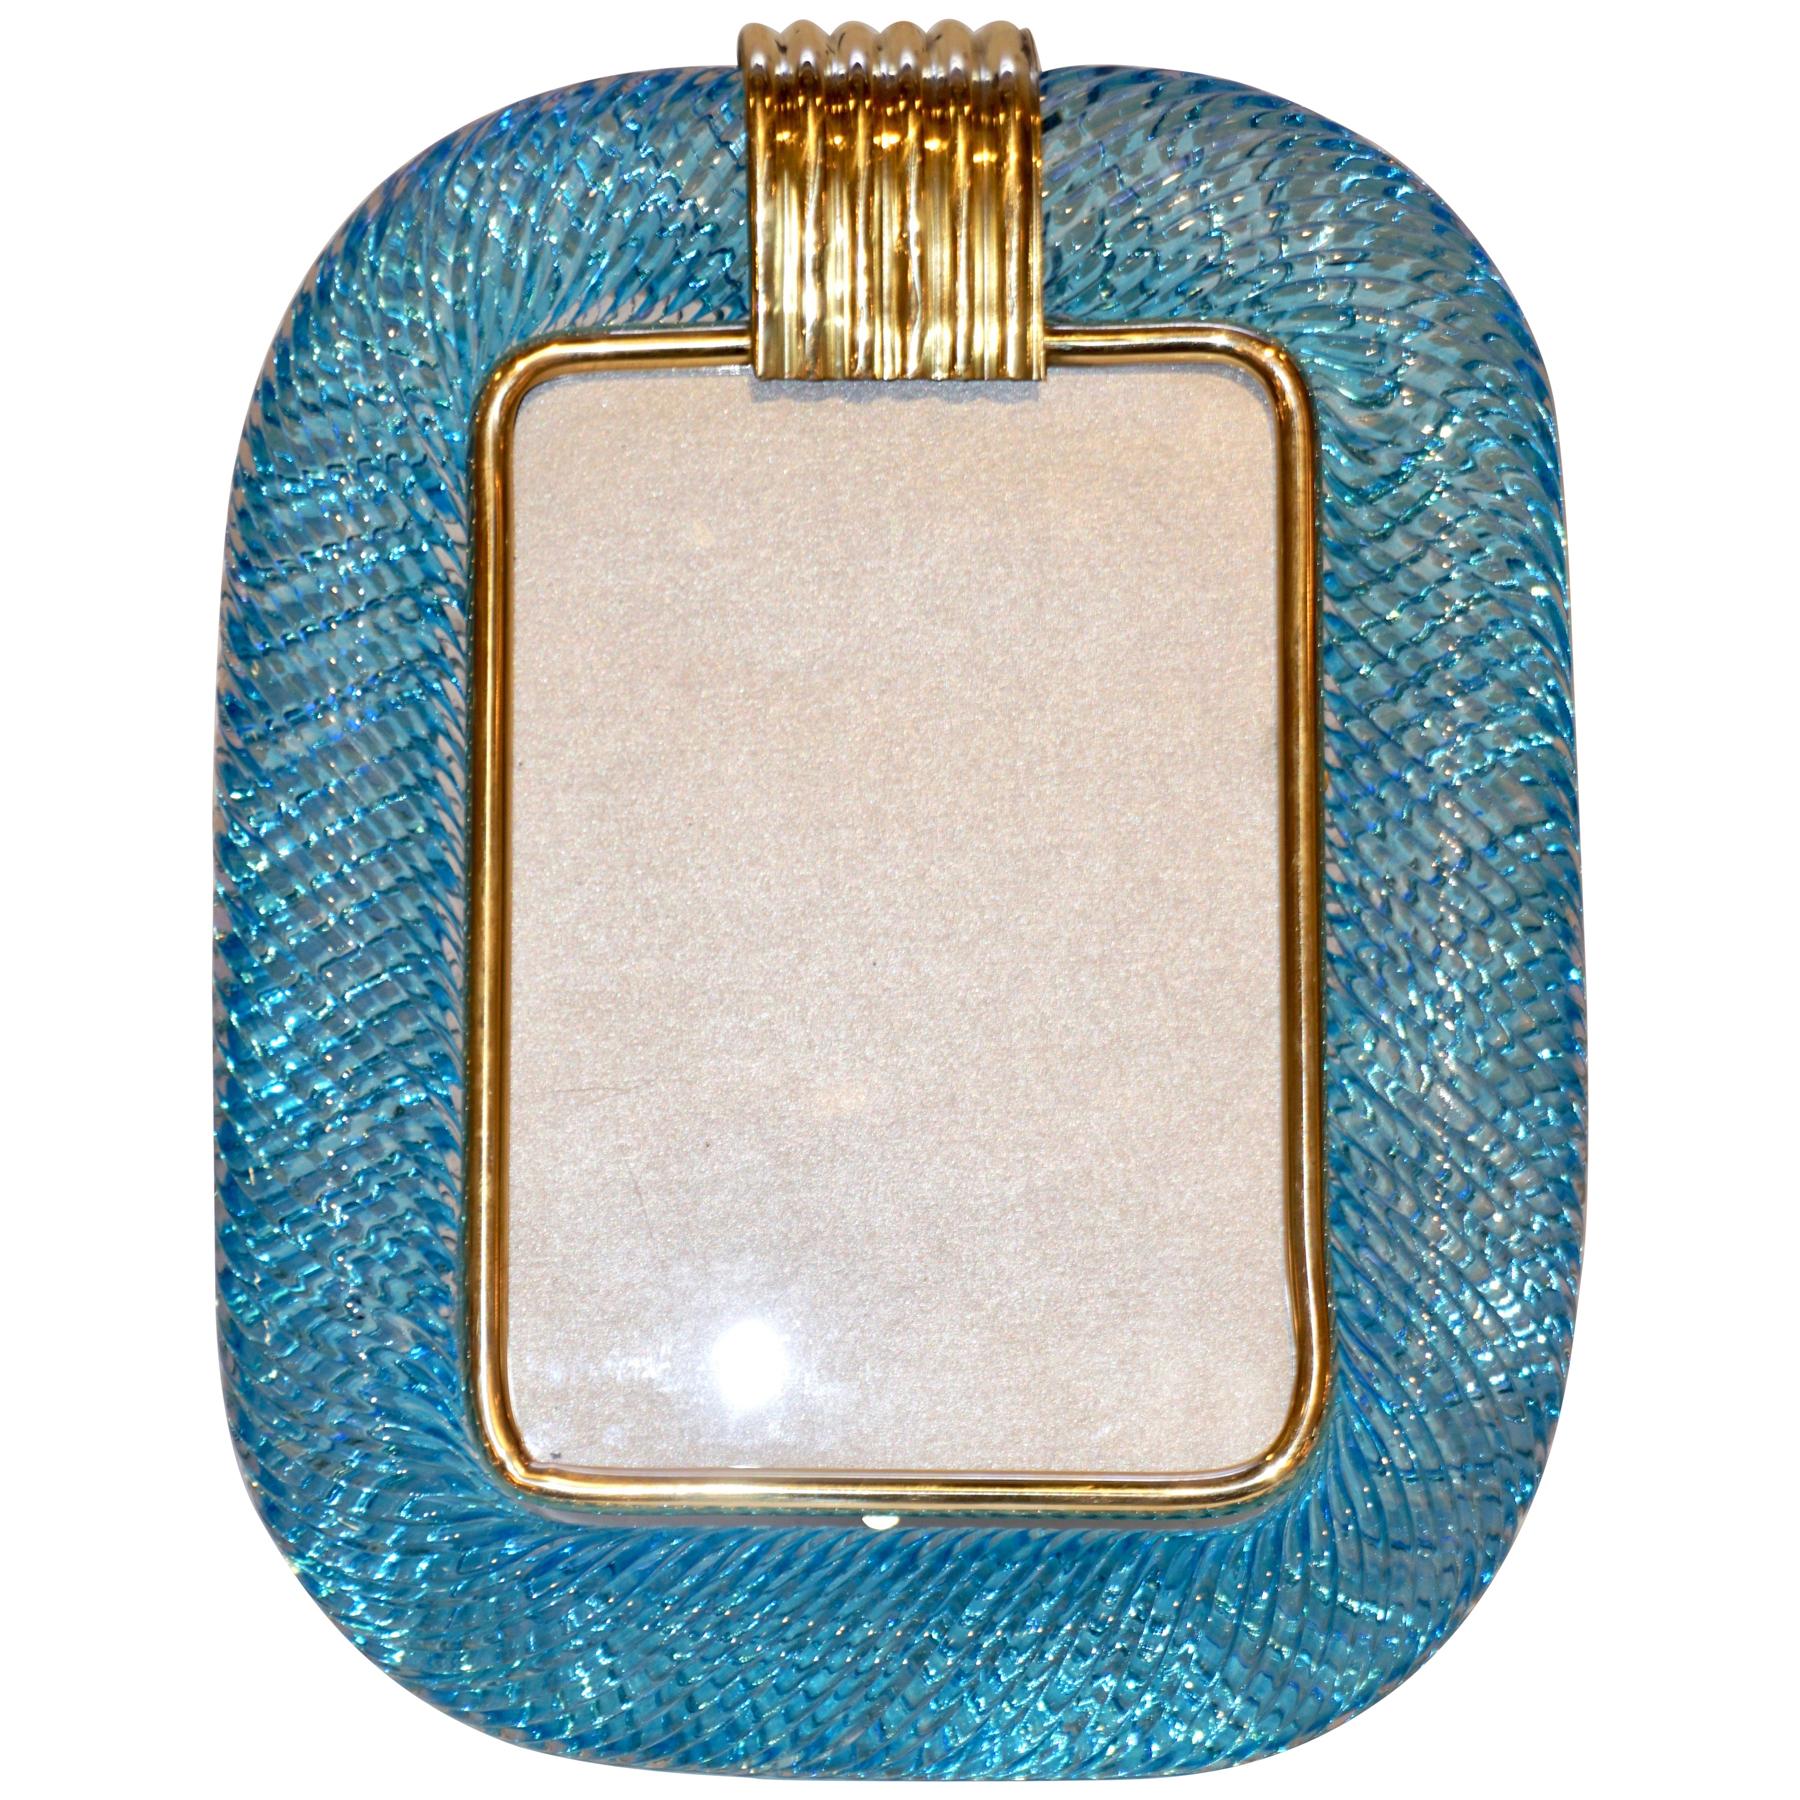 Venini 1970s Italian Vintage Turquoise Blue and Gold Murano Glass Photo Frame